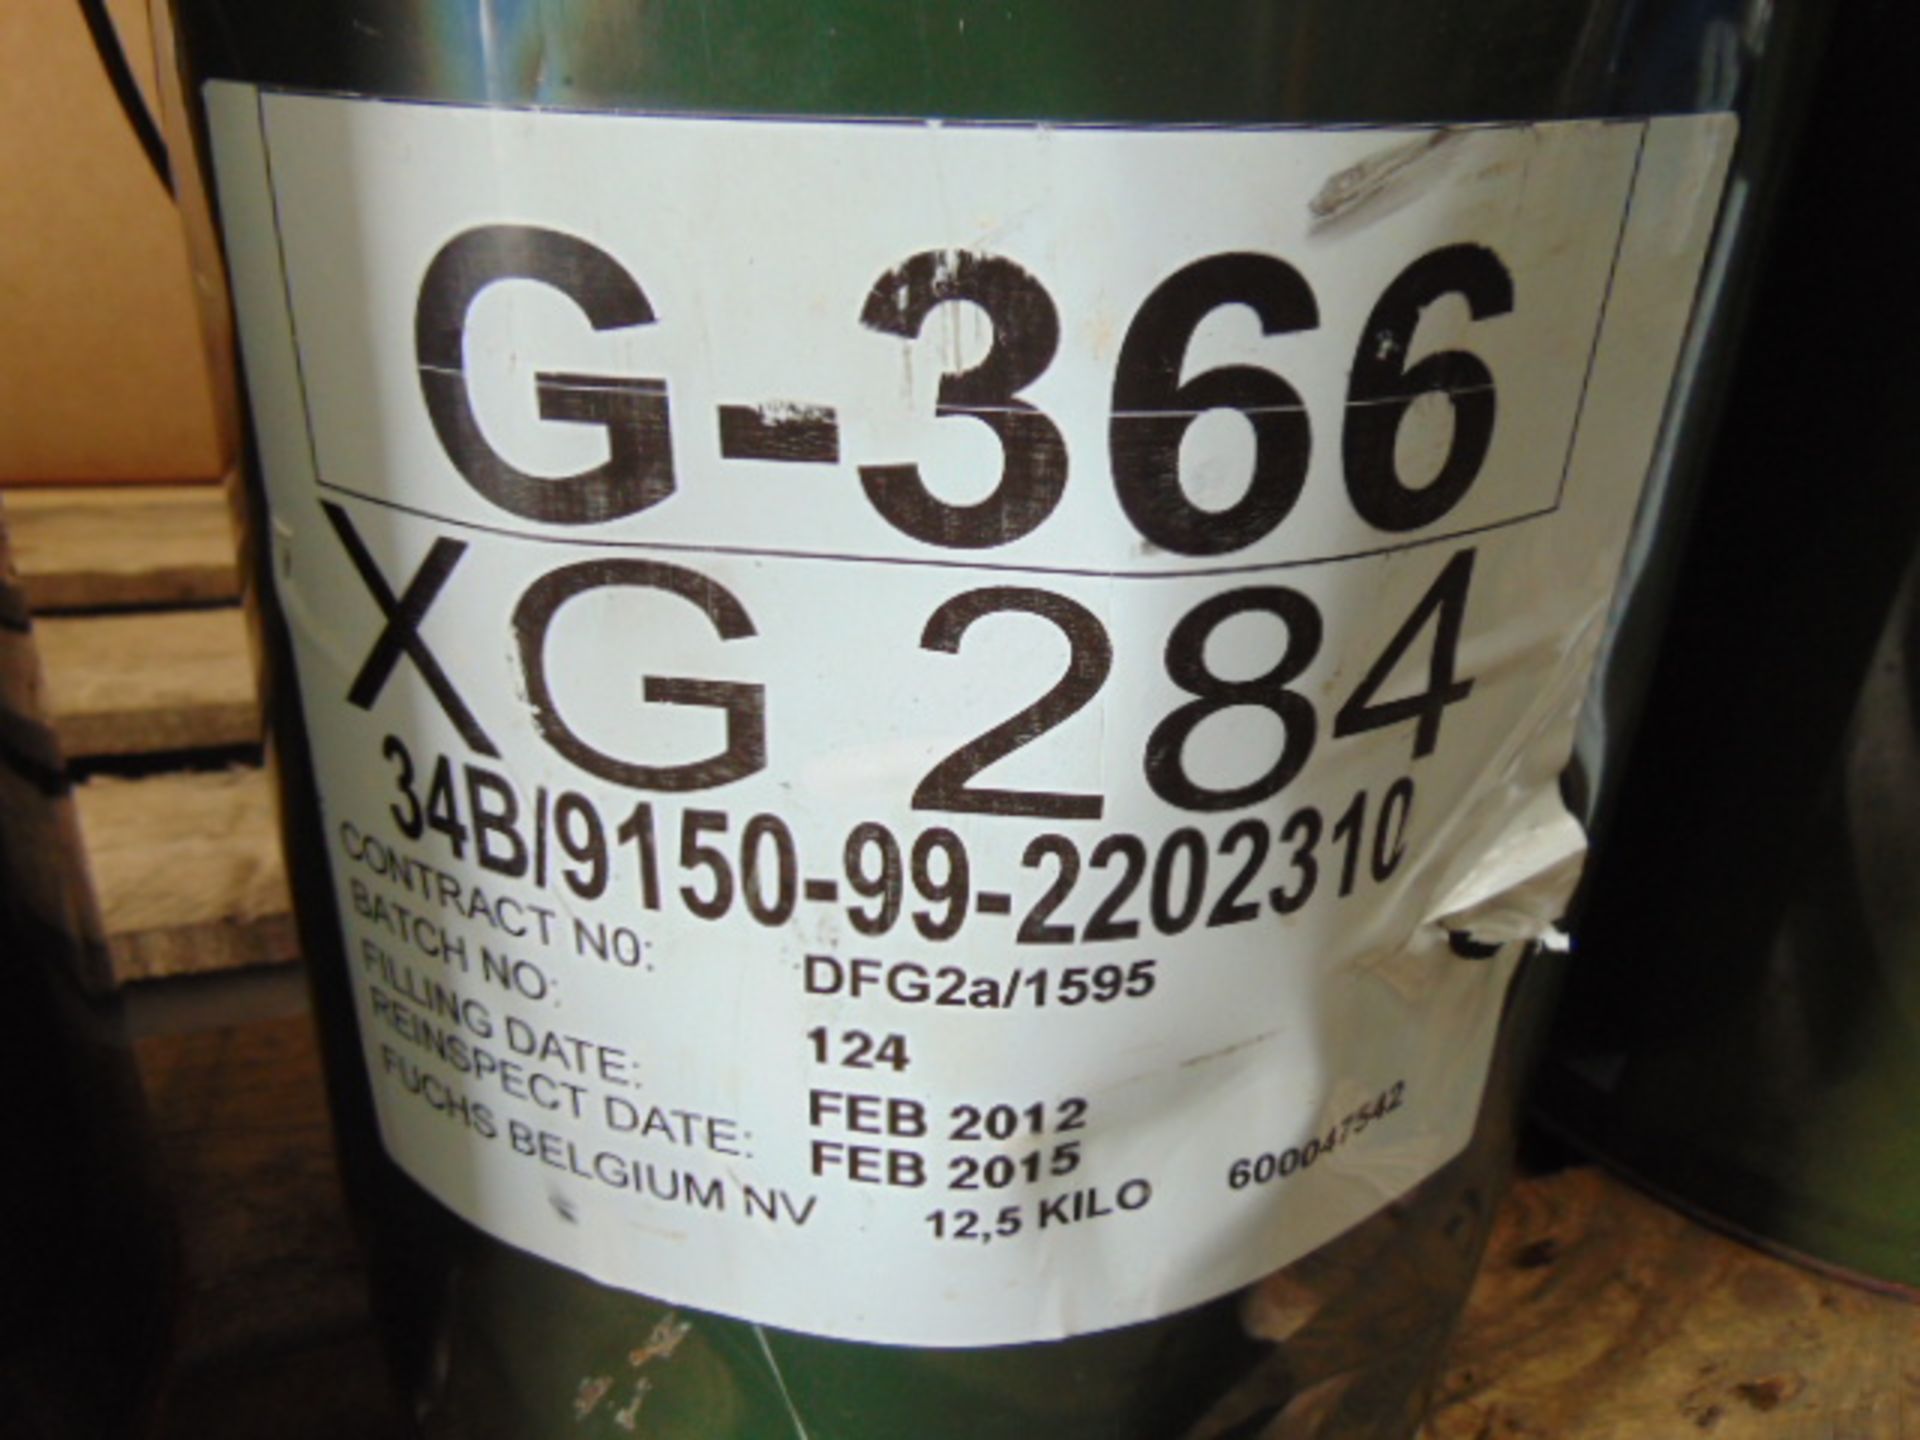 4 x Unissued 12.5Kg Tins of XG-284 G-366 Grease - Image 3 of 4